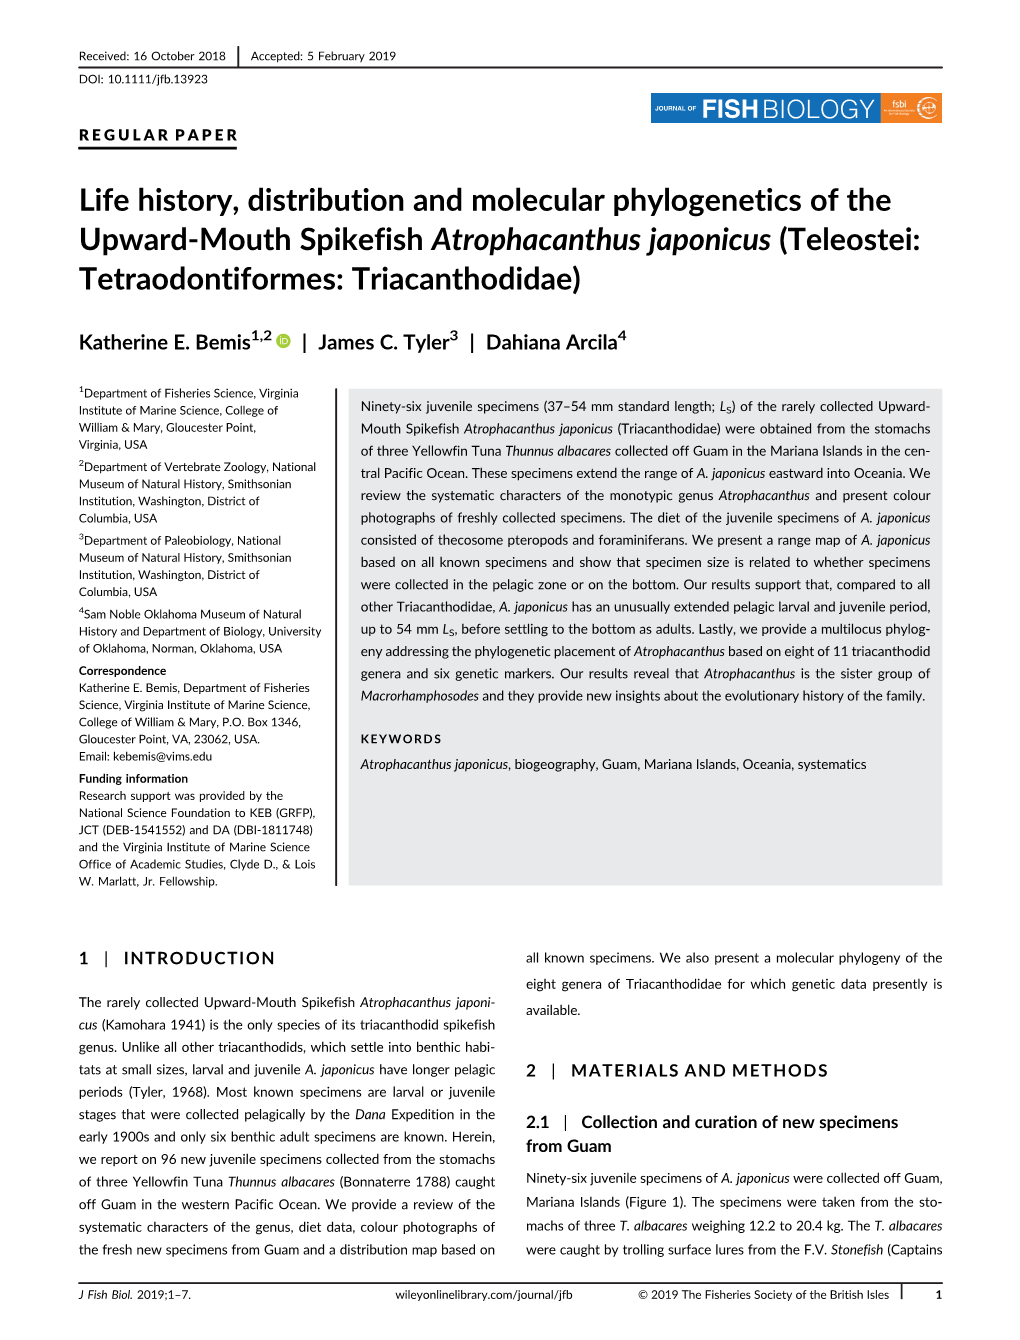 Life History, Distribution and Molecular Phylogenetics of the Upward-Mouth Spikefish Atrophacanthus Japonicus (Teleostei: Tetraodontiformes: Triacanthodidae)